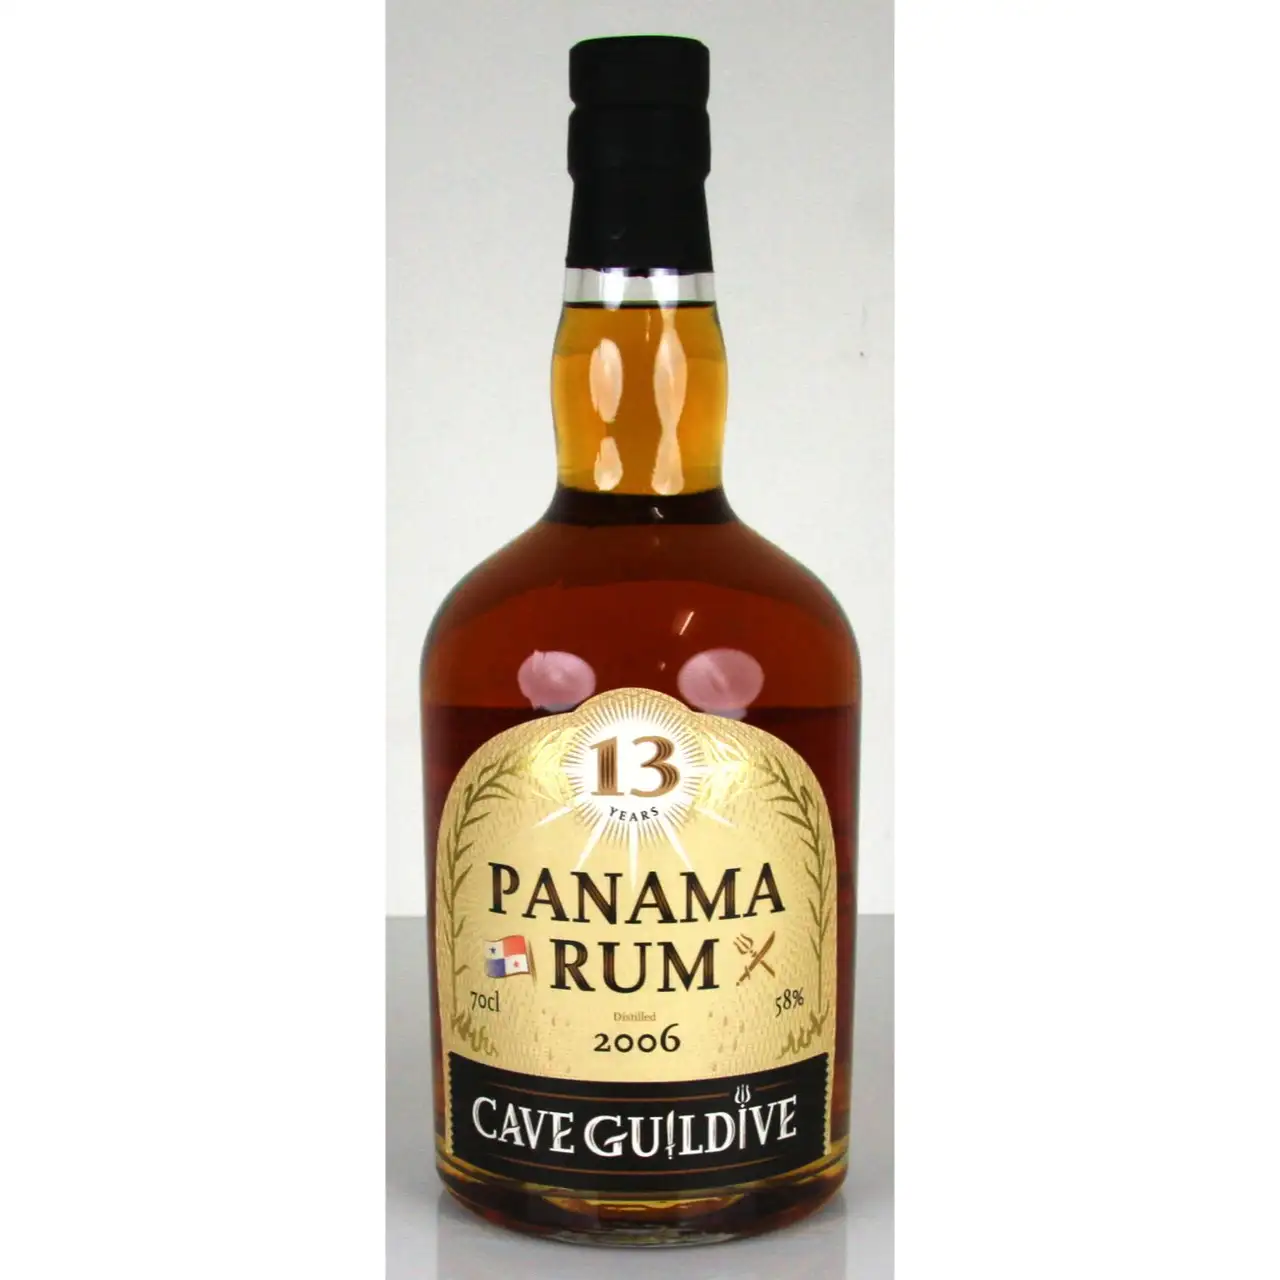 Image of the front of the bottle of the rum Panama Rum